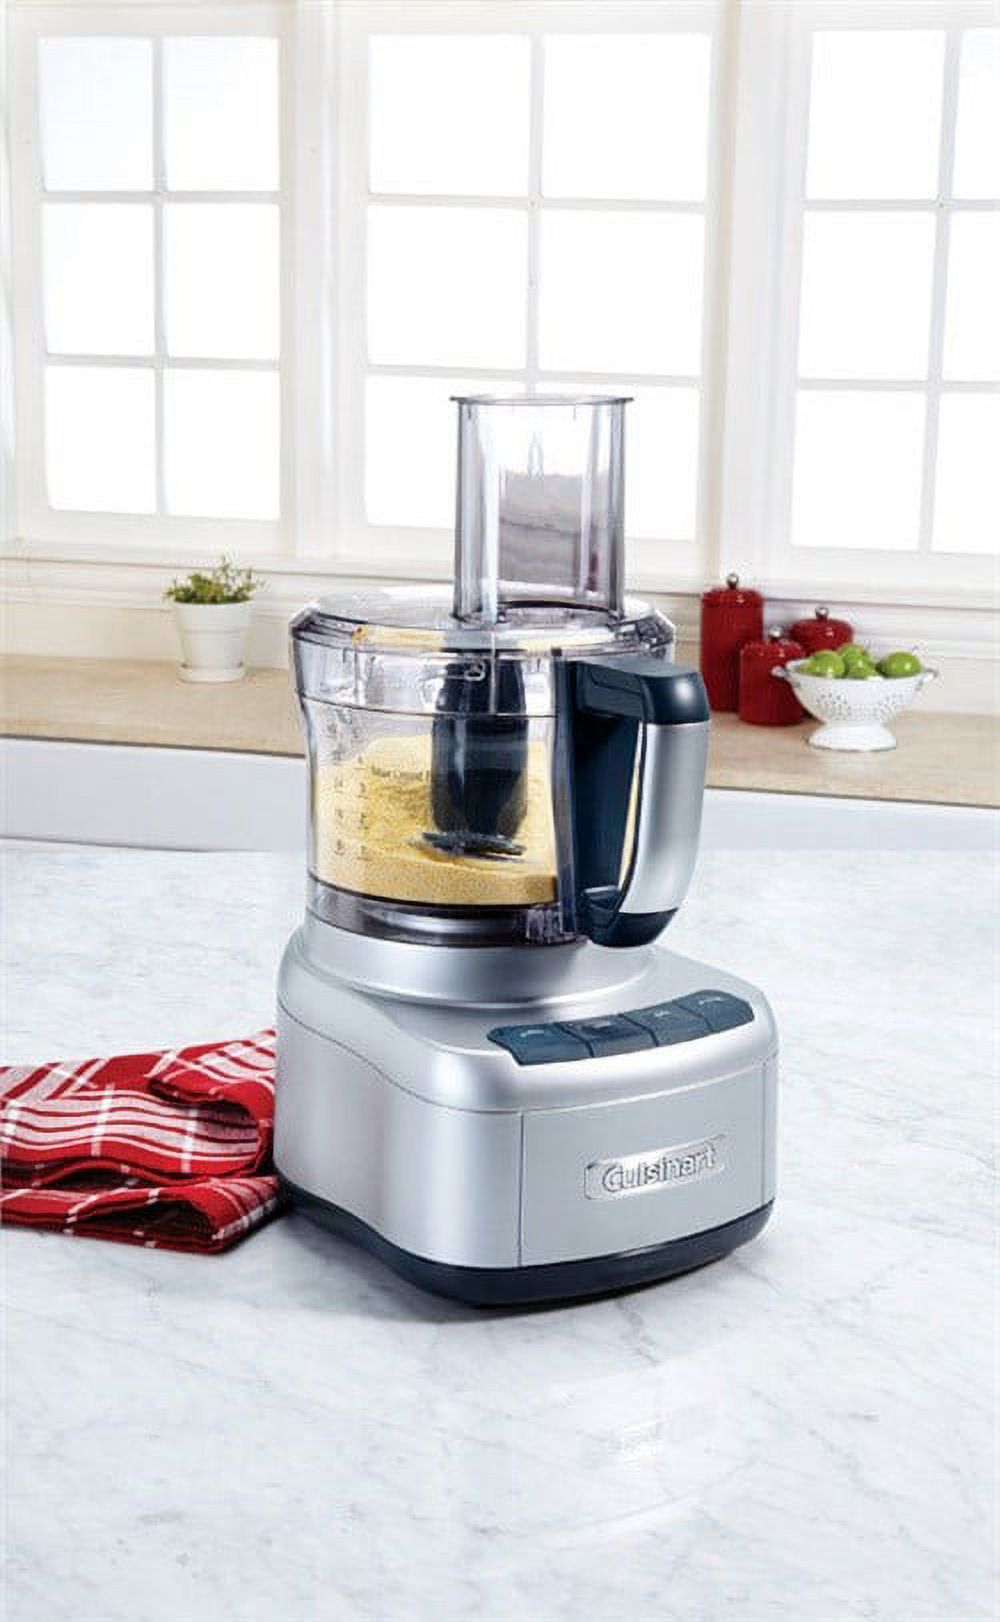 Cuisinart Elemental 8 Cup Food Processor, Silver (FP-8SV) - image 2 of 2